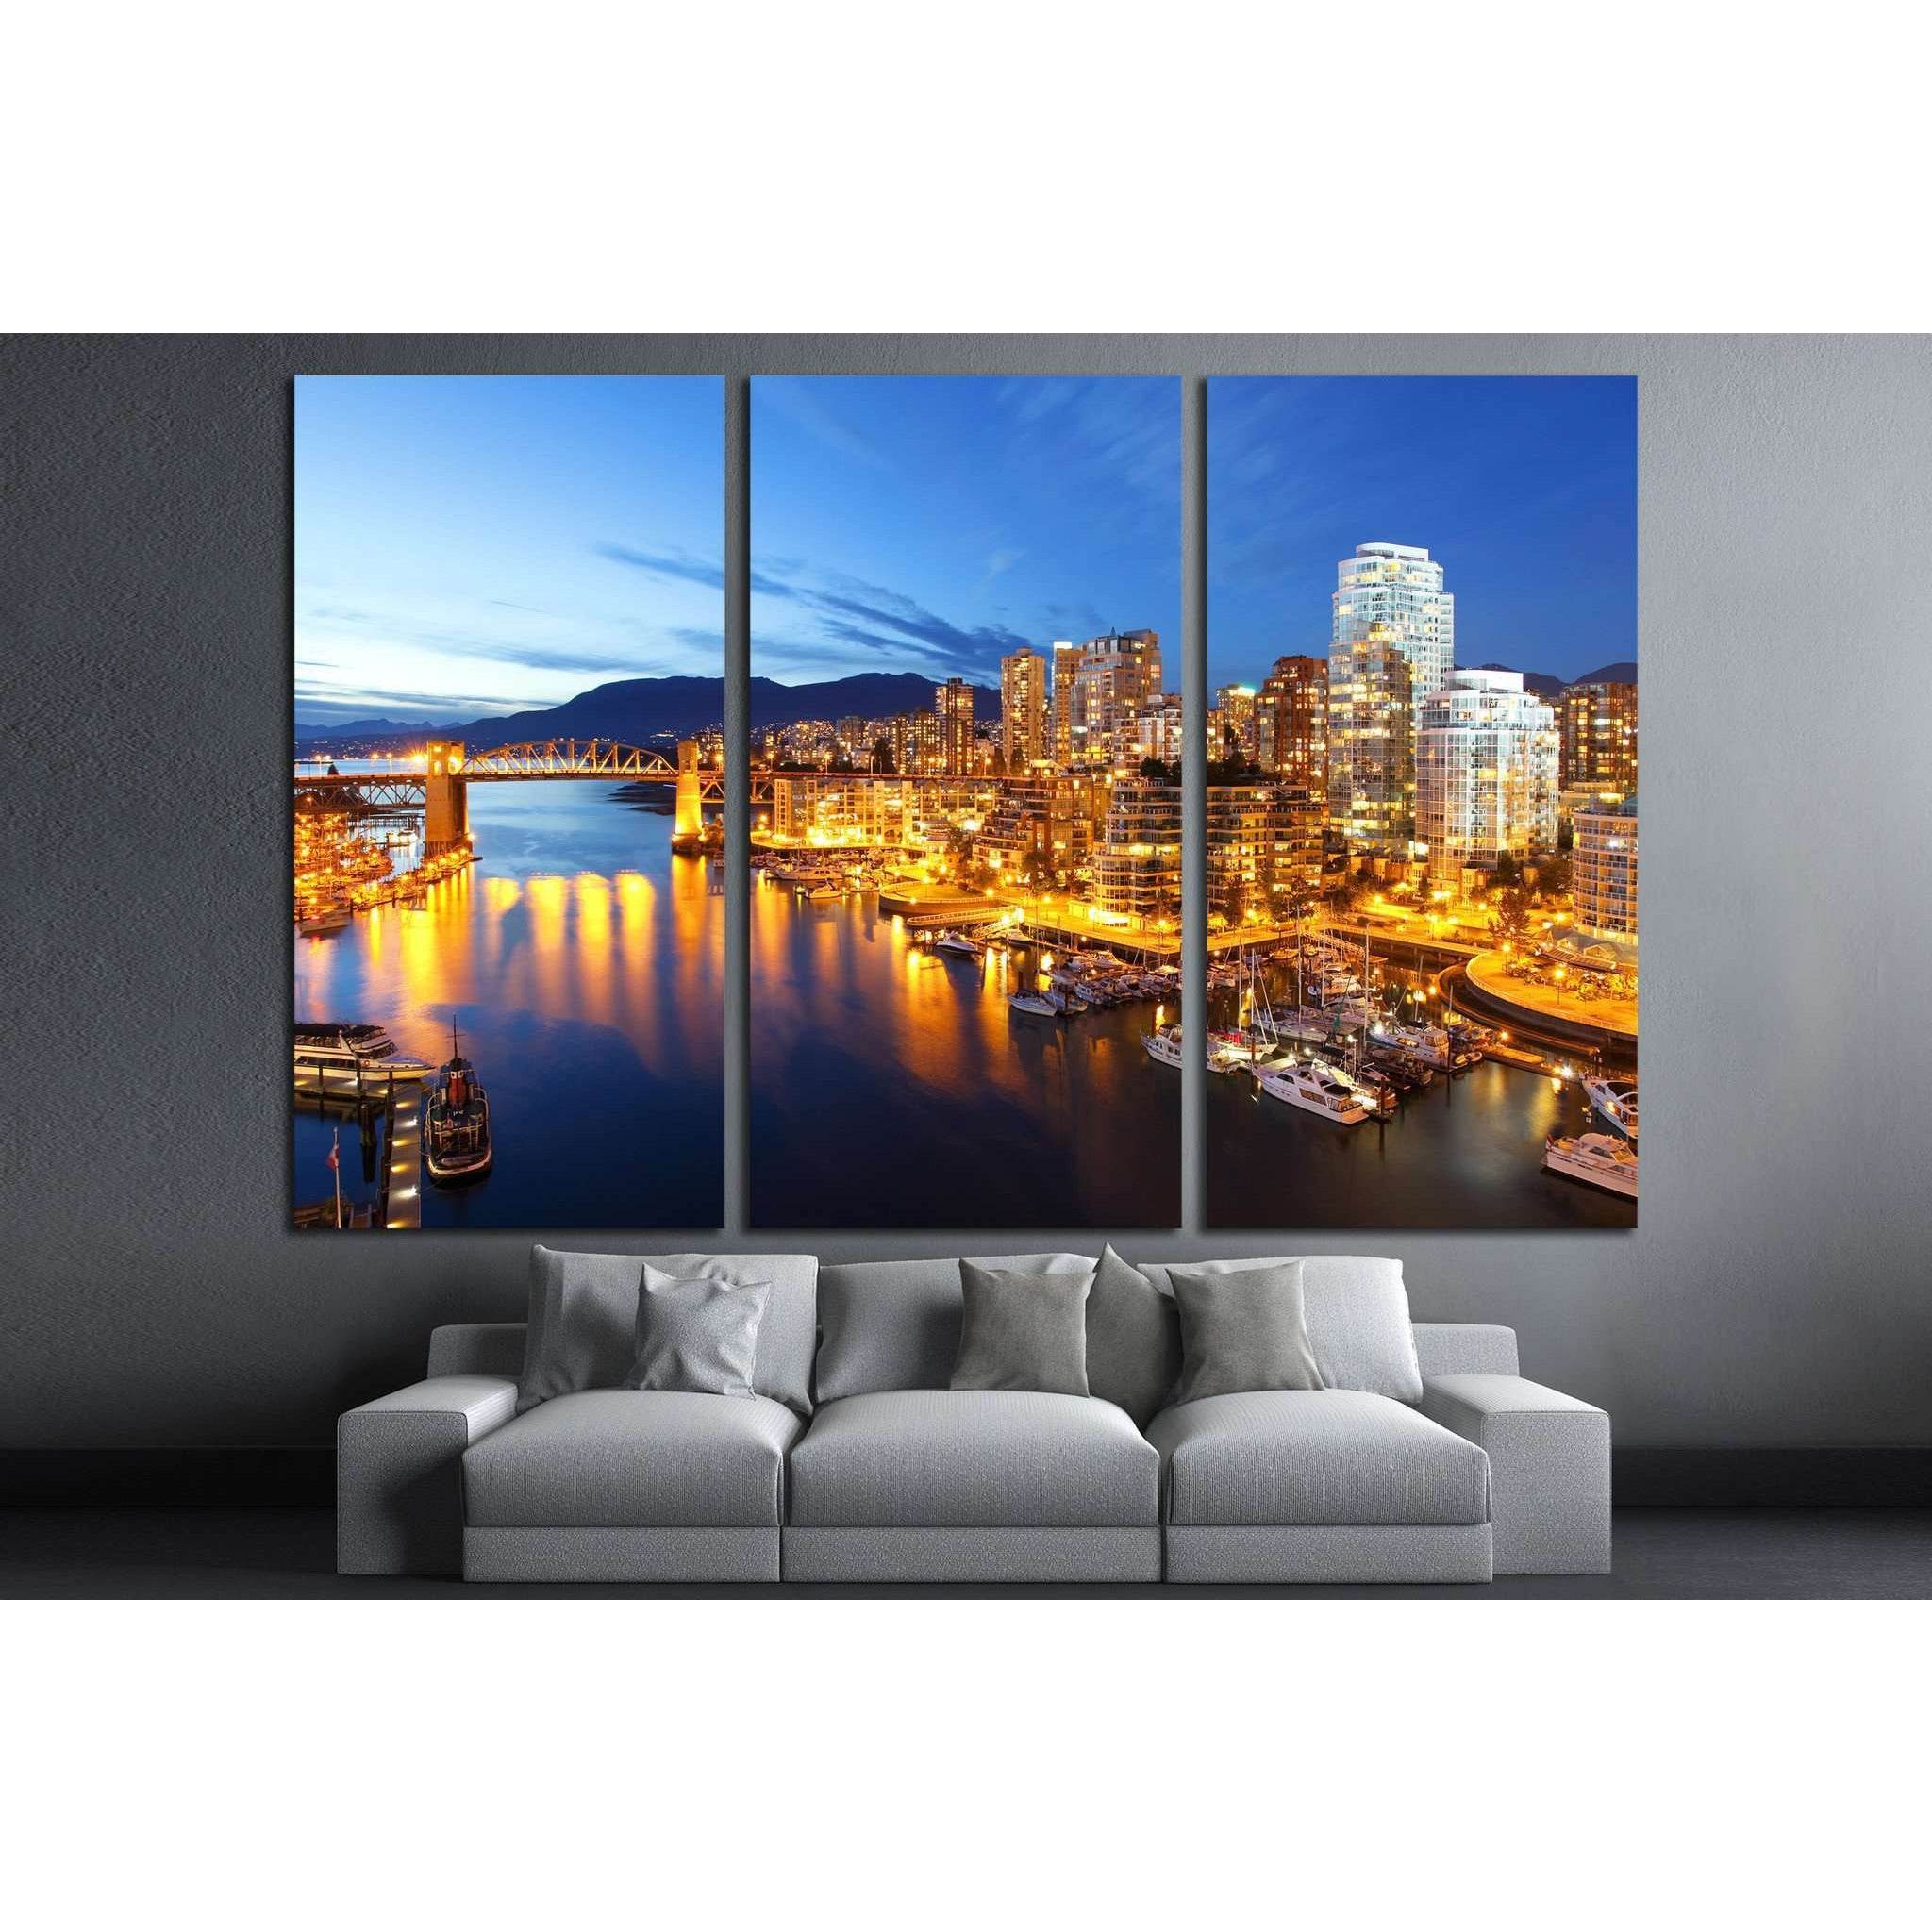 The city of Vancouver in Canada №2038 Ready to Hang Canvas Print